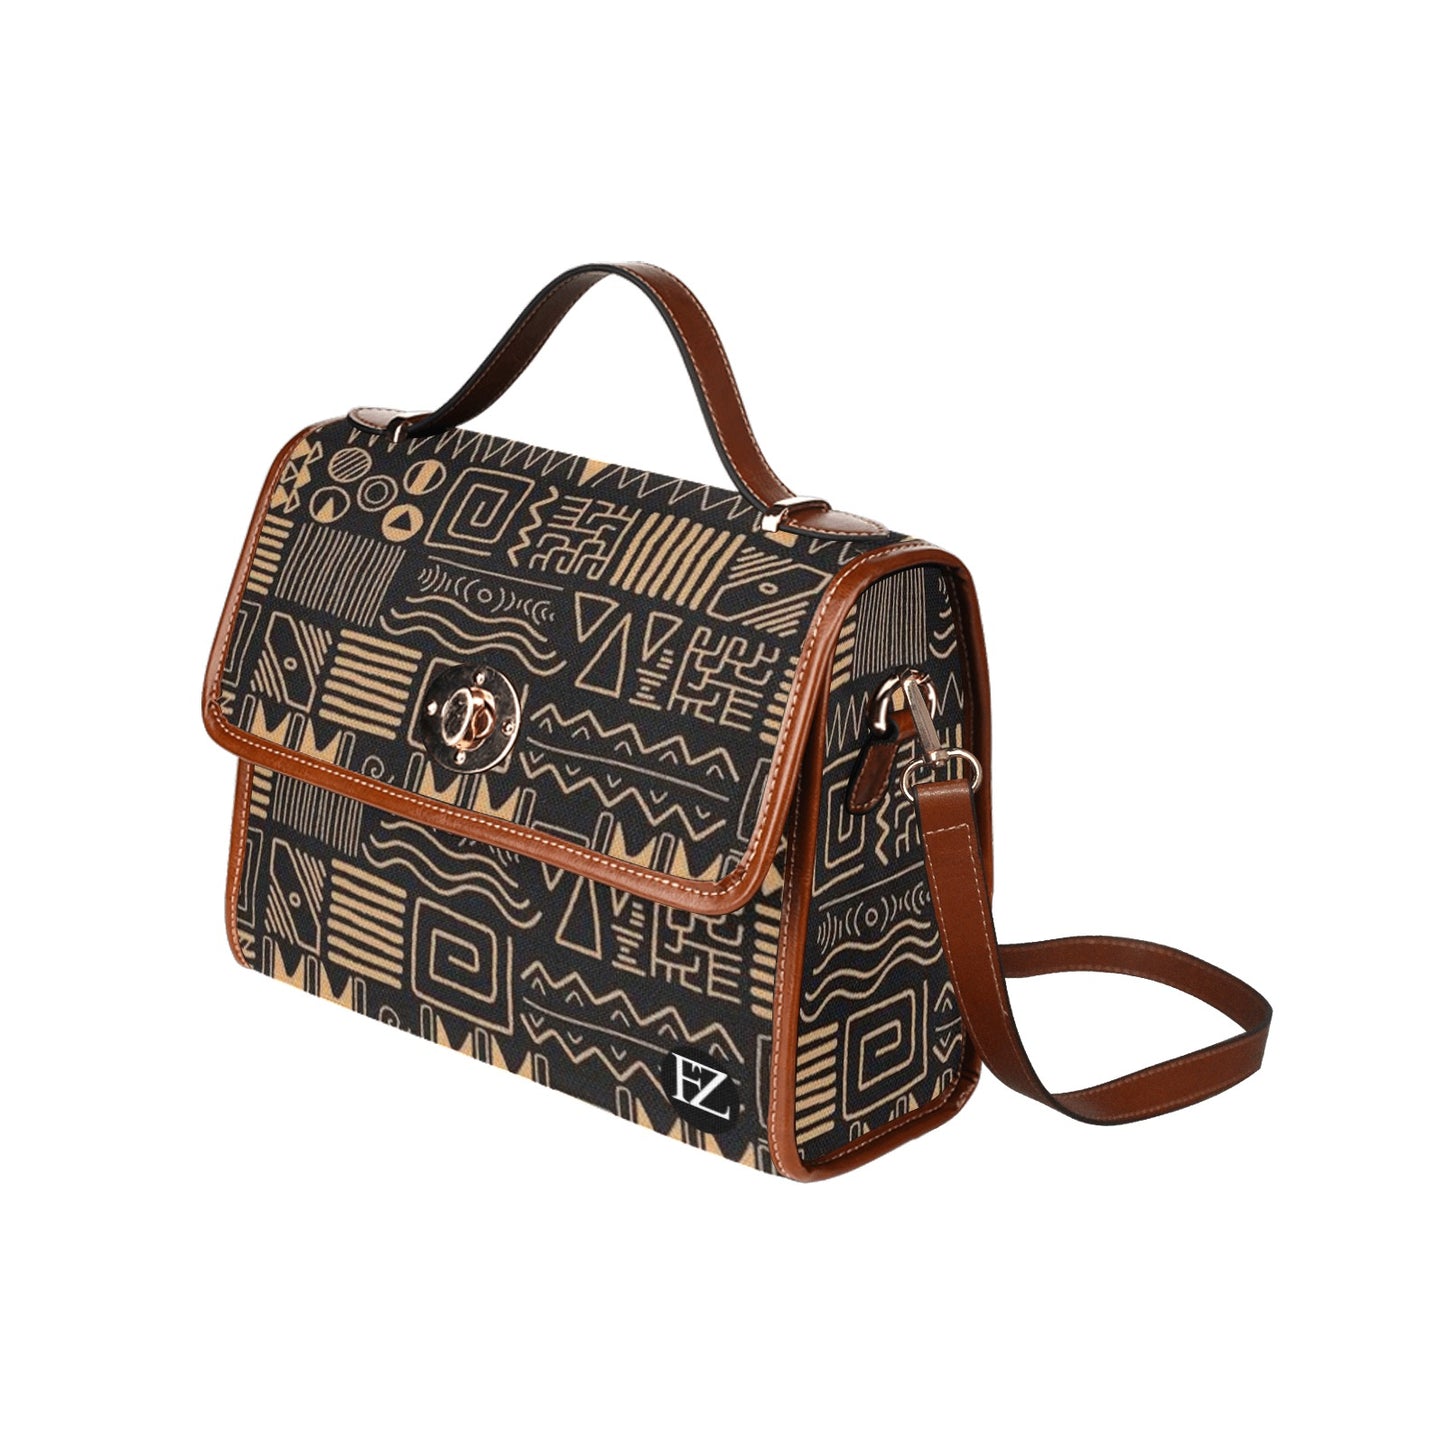 fz egypt hand bag all over print waterproof canvas bag(model1641)(brown strap)